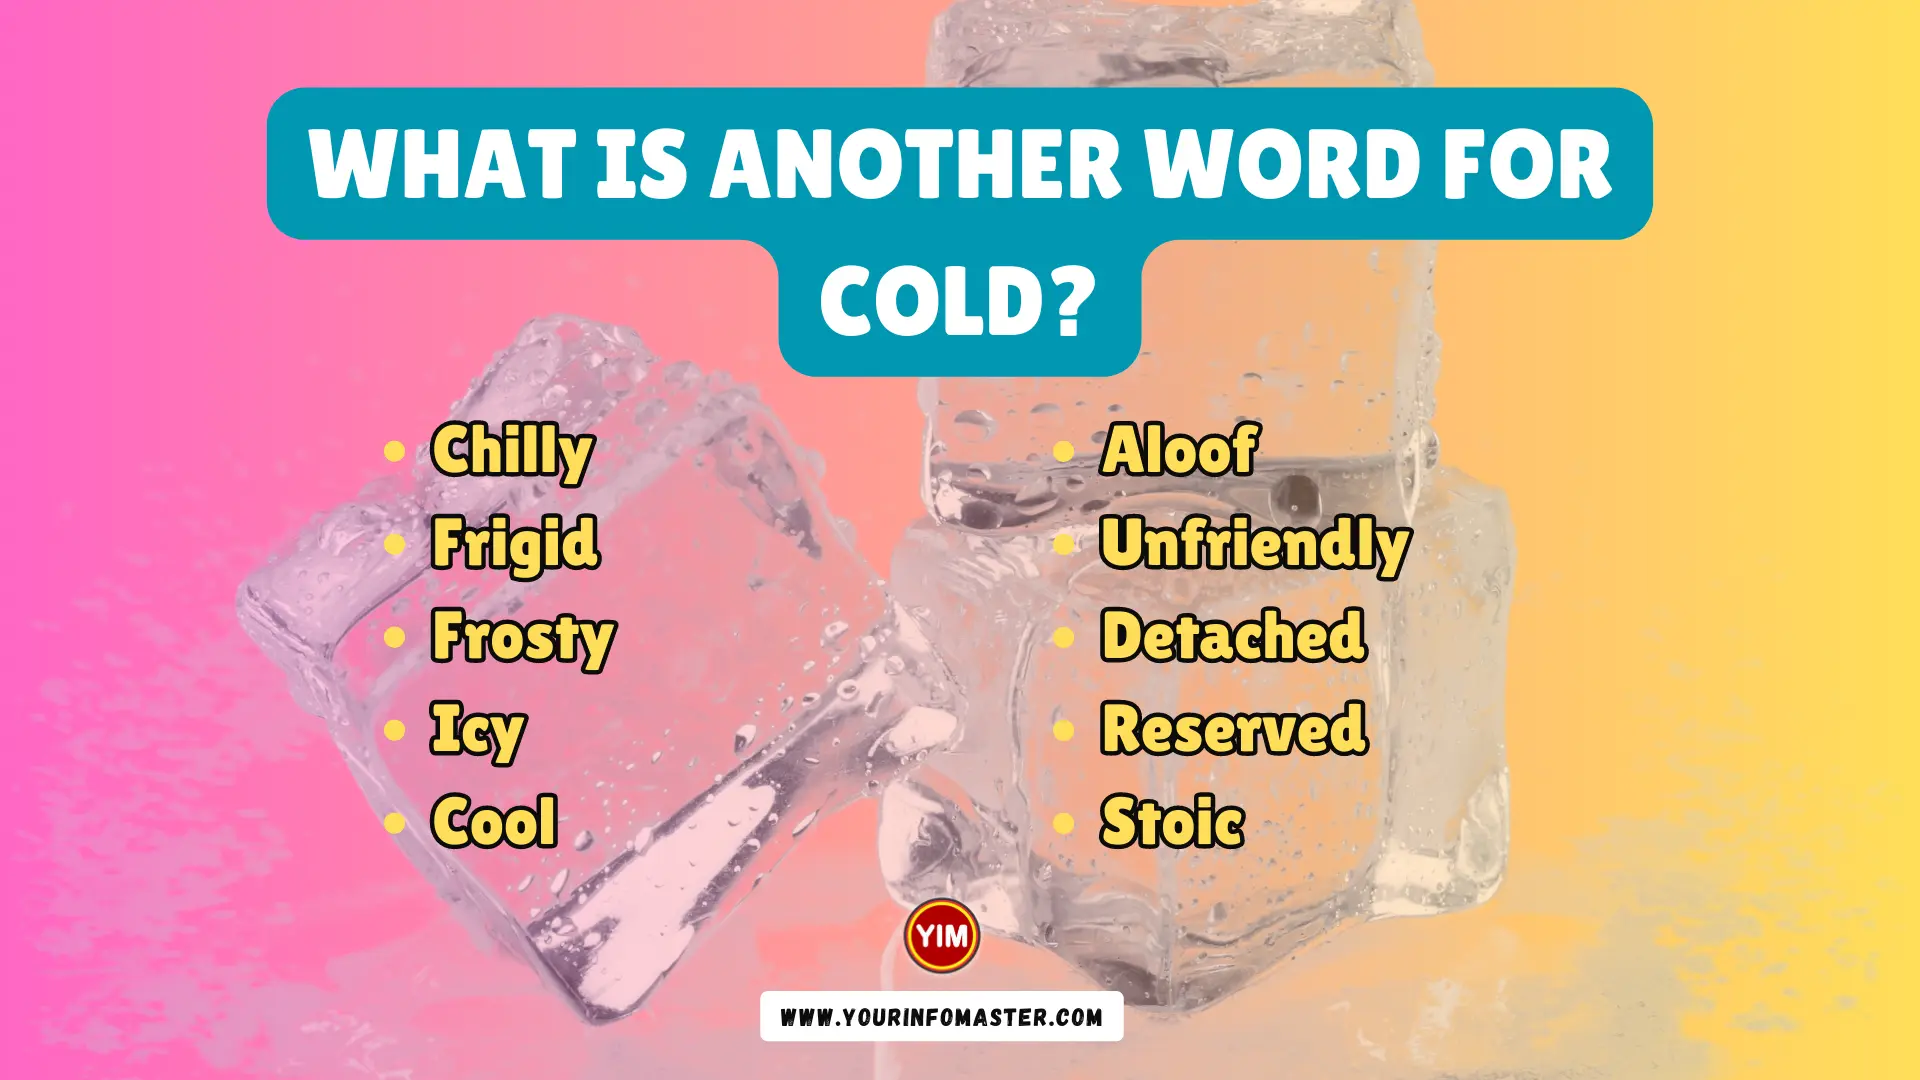 What is another word for Cold